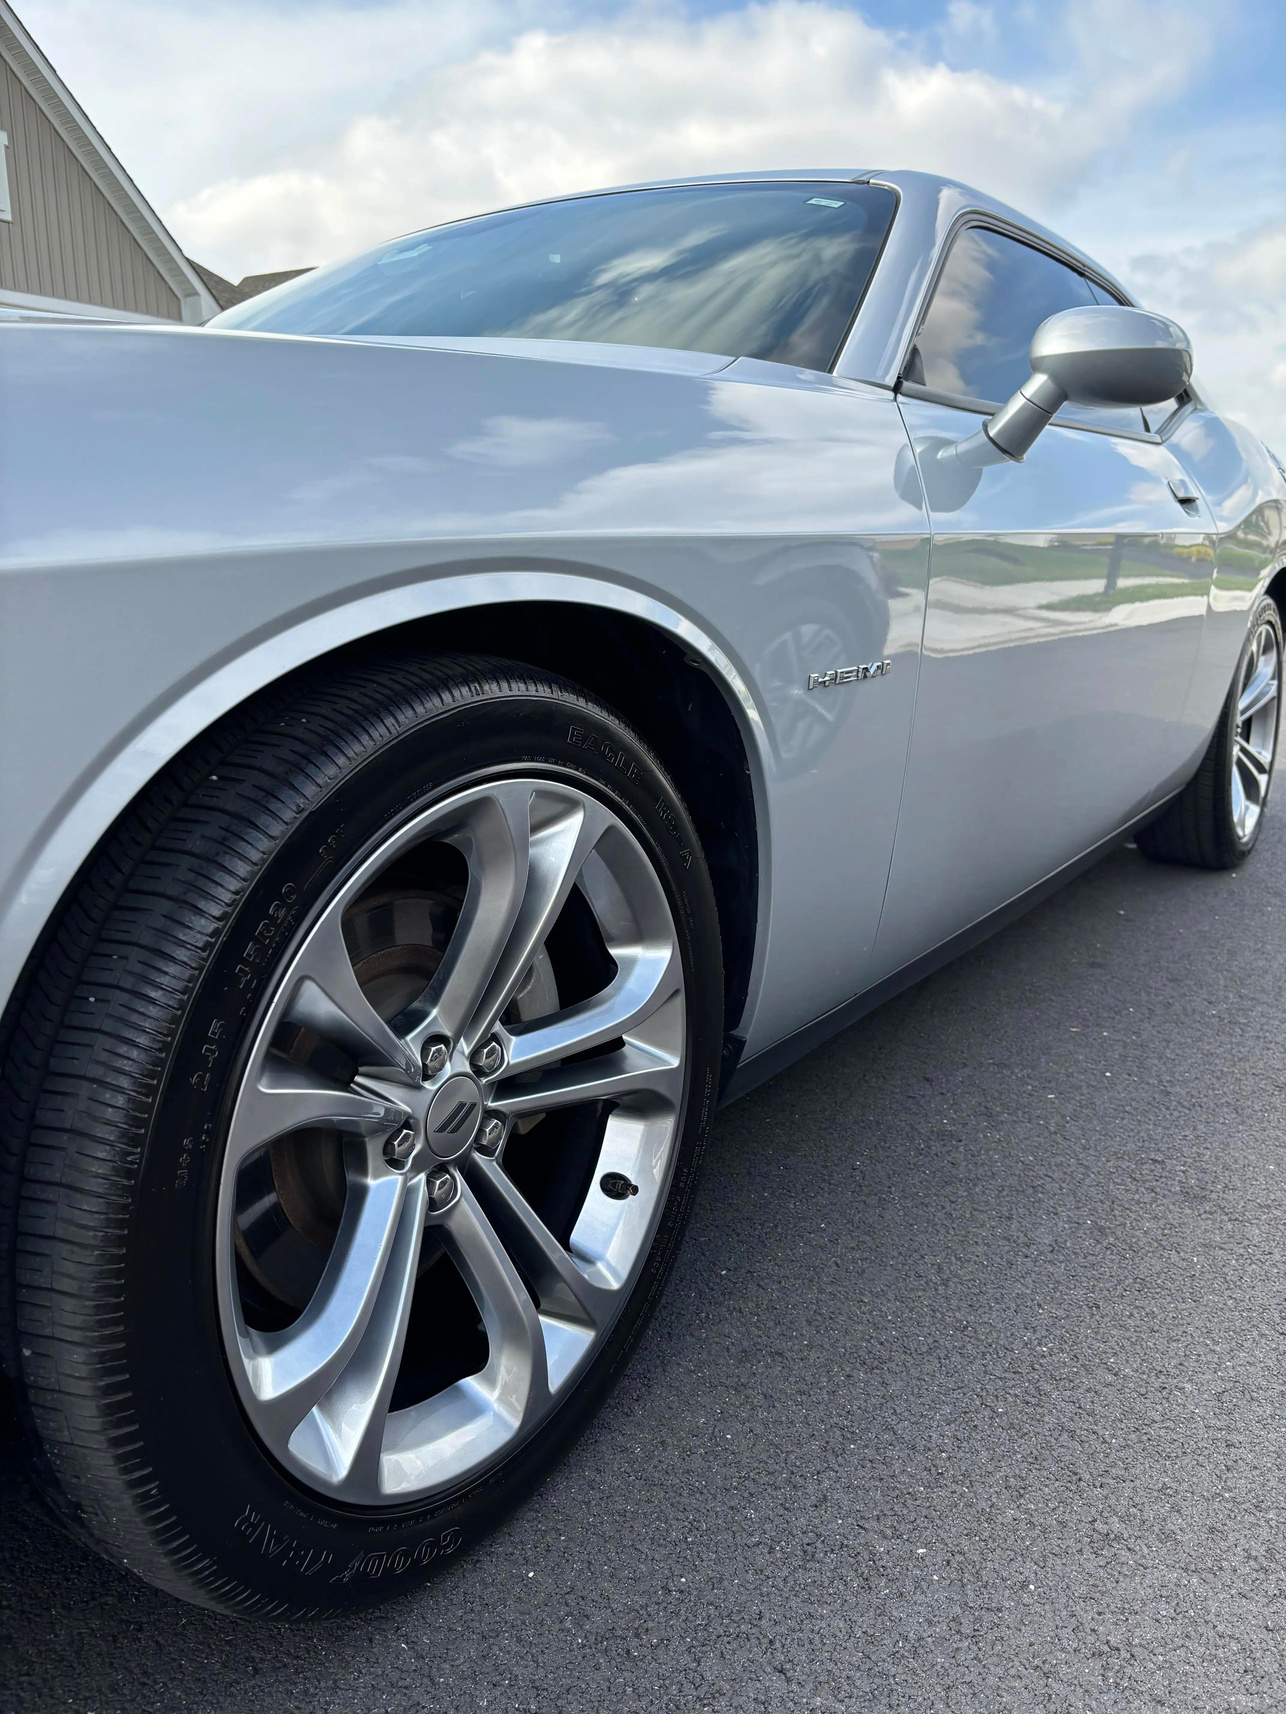 This Dodge Challenger received a basic exterior and interior detail.